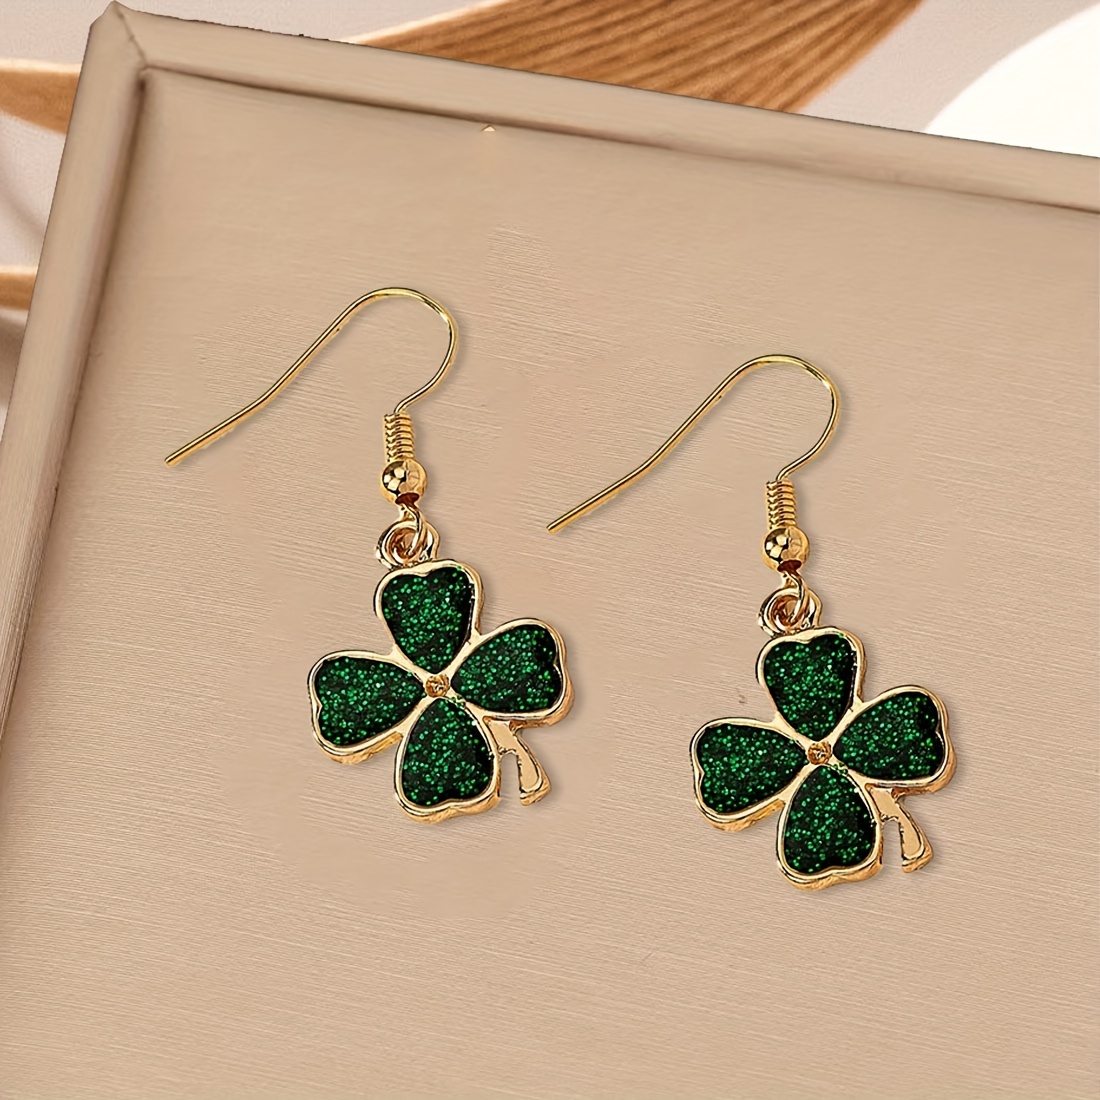 Source Cool Unique Fashion Retro Gold Silver Color Cross Metal Stud Earrings  Lucky Four Leaf Clover Earring for Women Daily Jewelry on m.